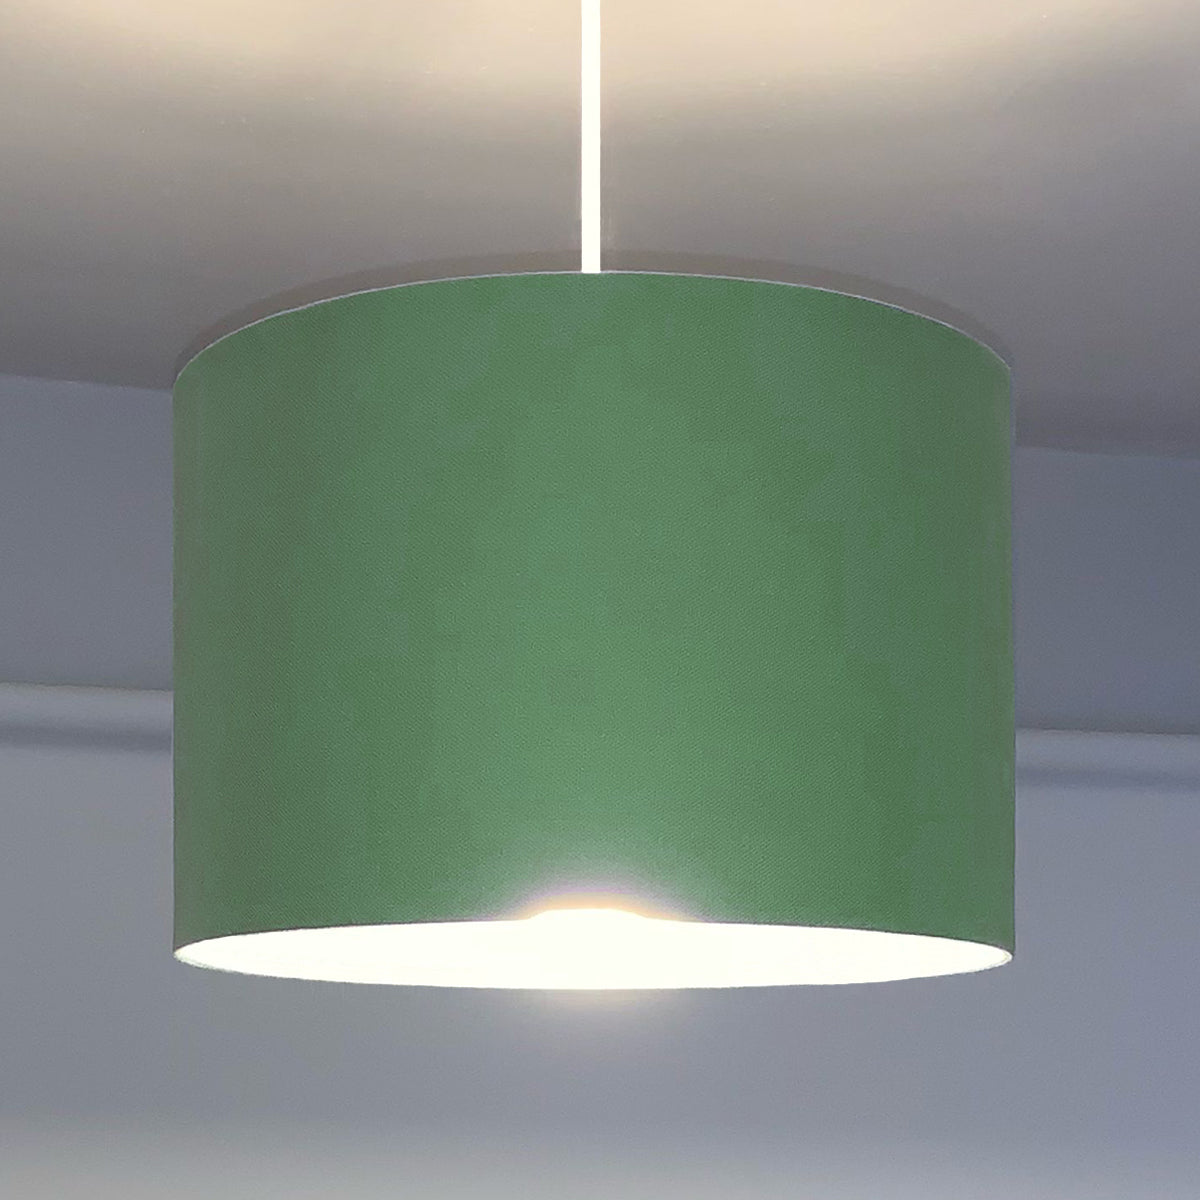 Our Lupo luxury cotton shade is sophisticated in appearance and we have designed the shade to suit a range of interiors. Easy to fit, it’s crafted from high-quality cotton on the outer and has a reflective silver metallic inner. It's made to fit both a ceiling light or lamp base.